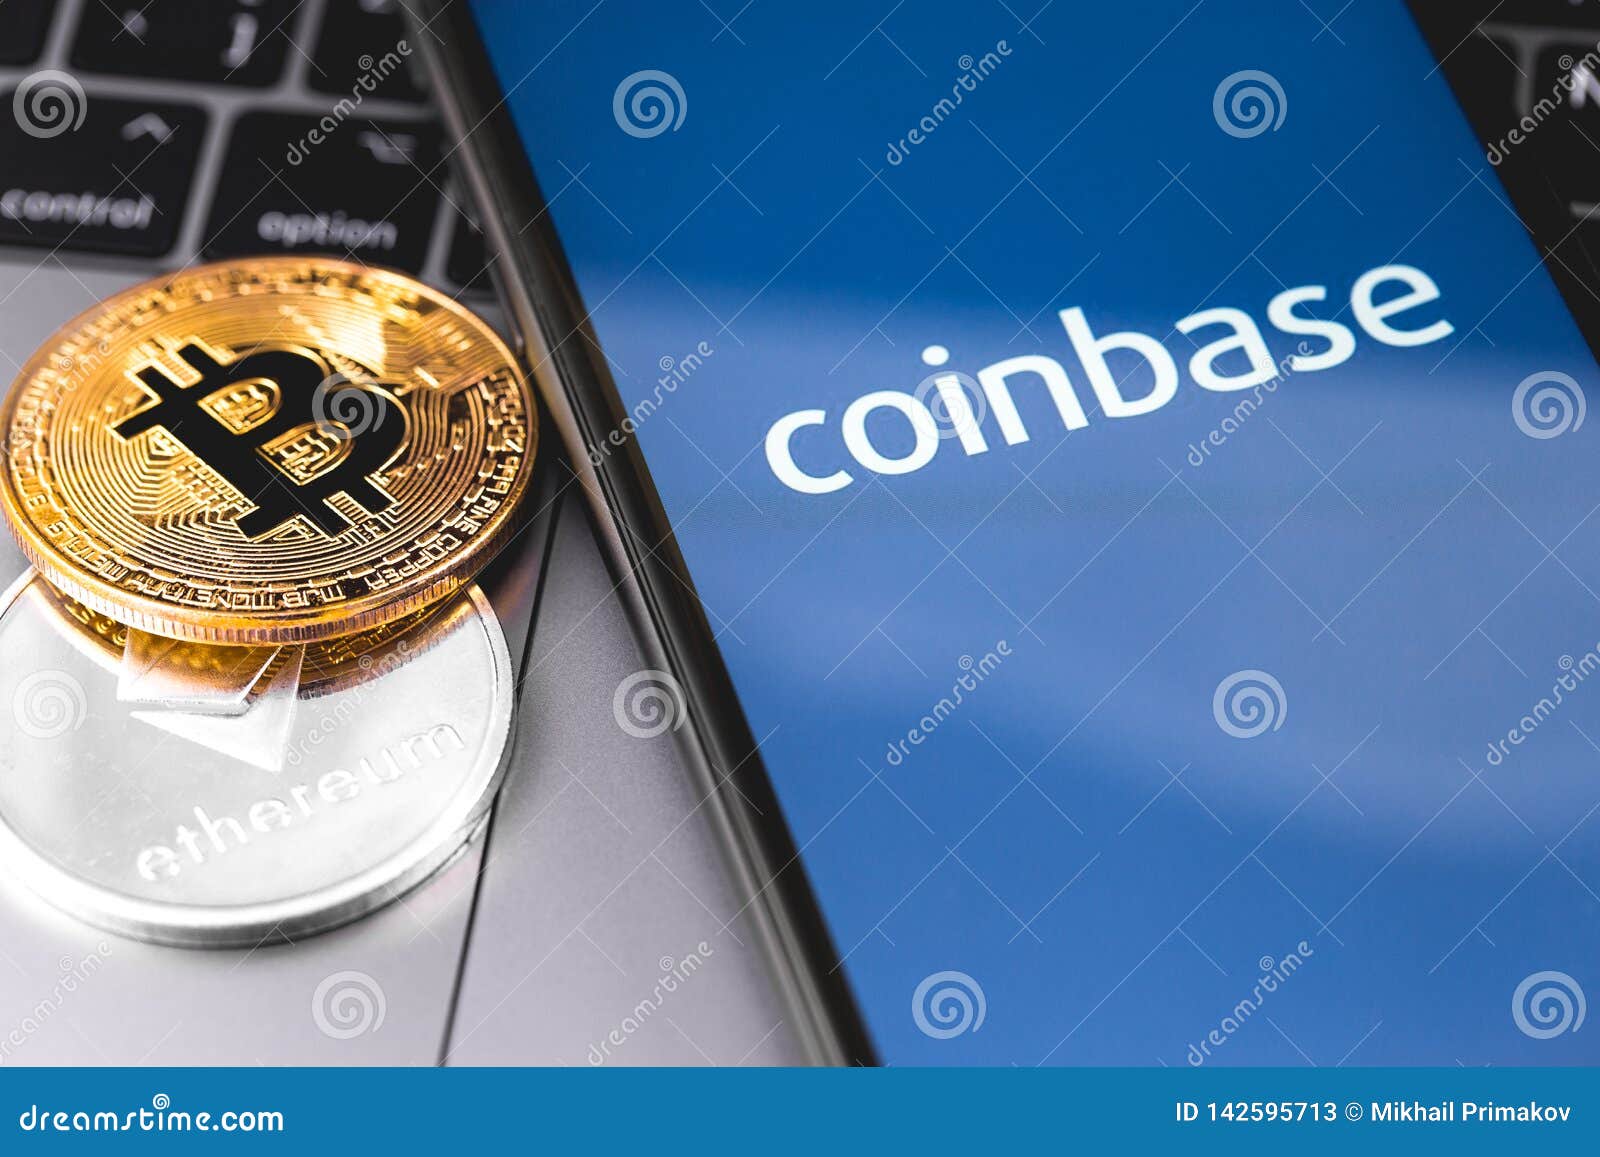 Bitcoin, Ethereum And Smartphone With Coinbase Logo On The ...